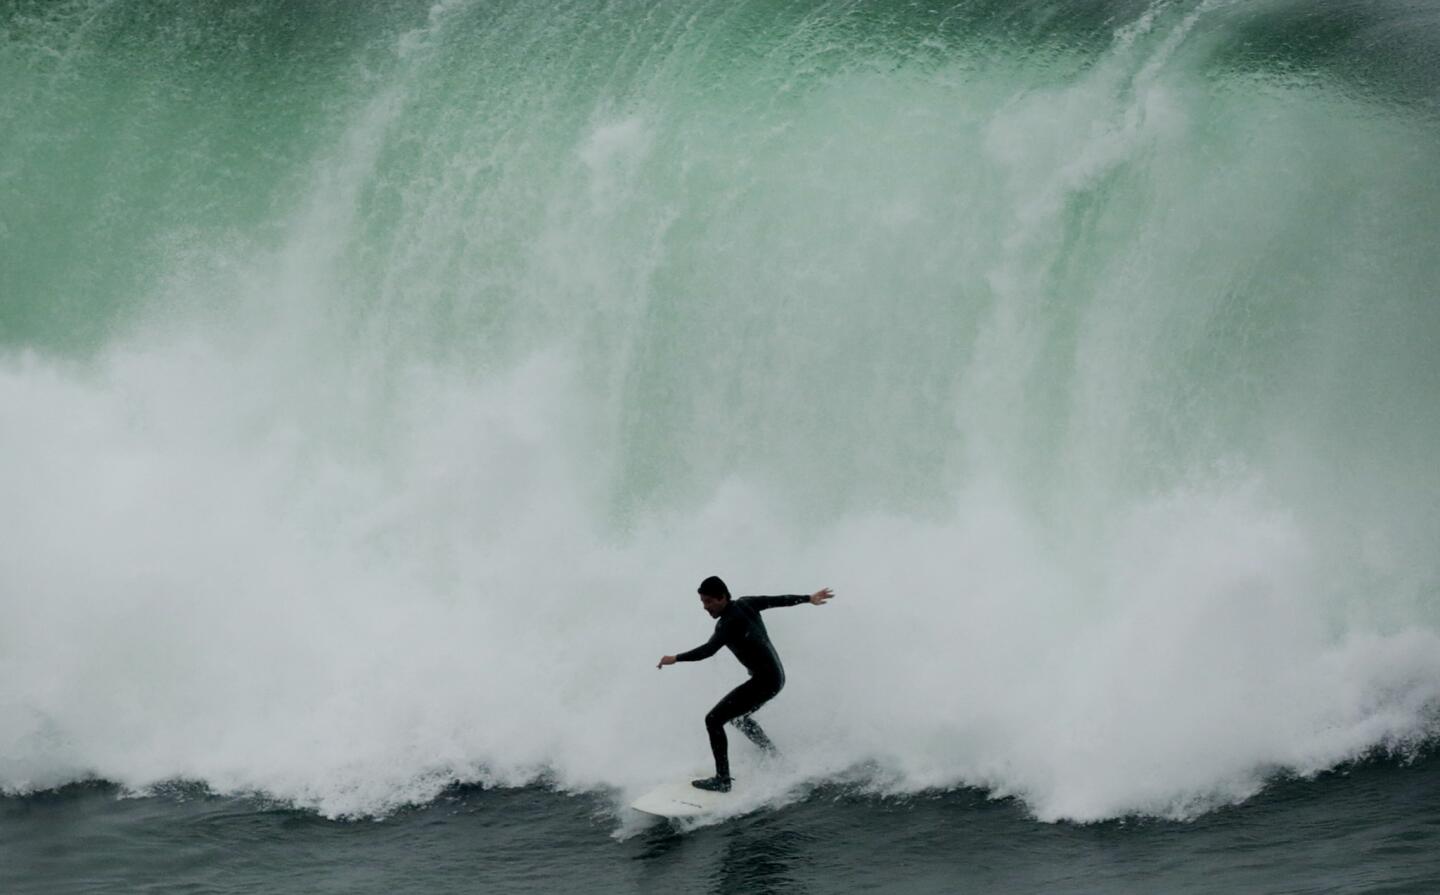 PHOTOS: Wedge got wild this week with big swell – Orange County Register